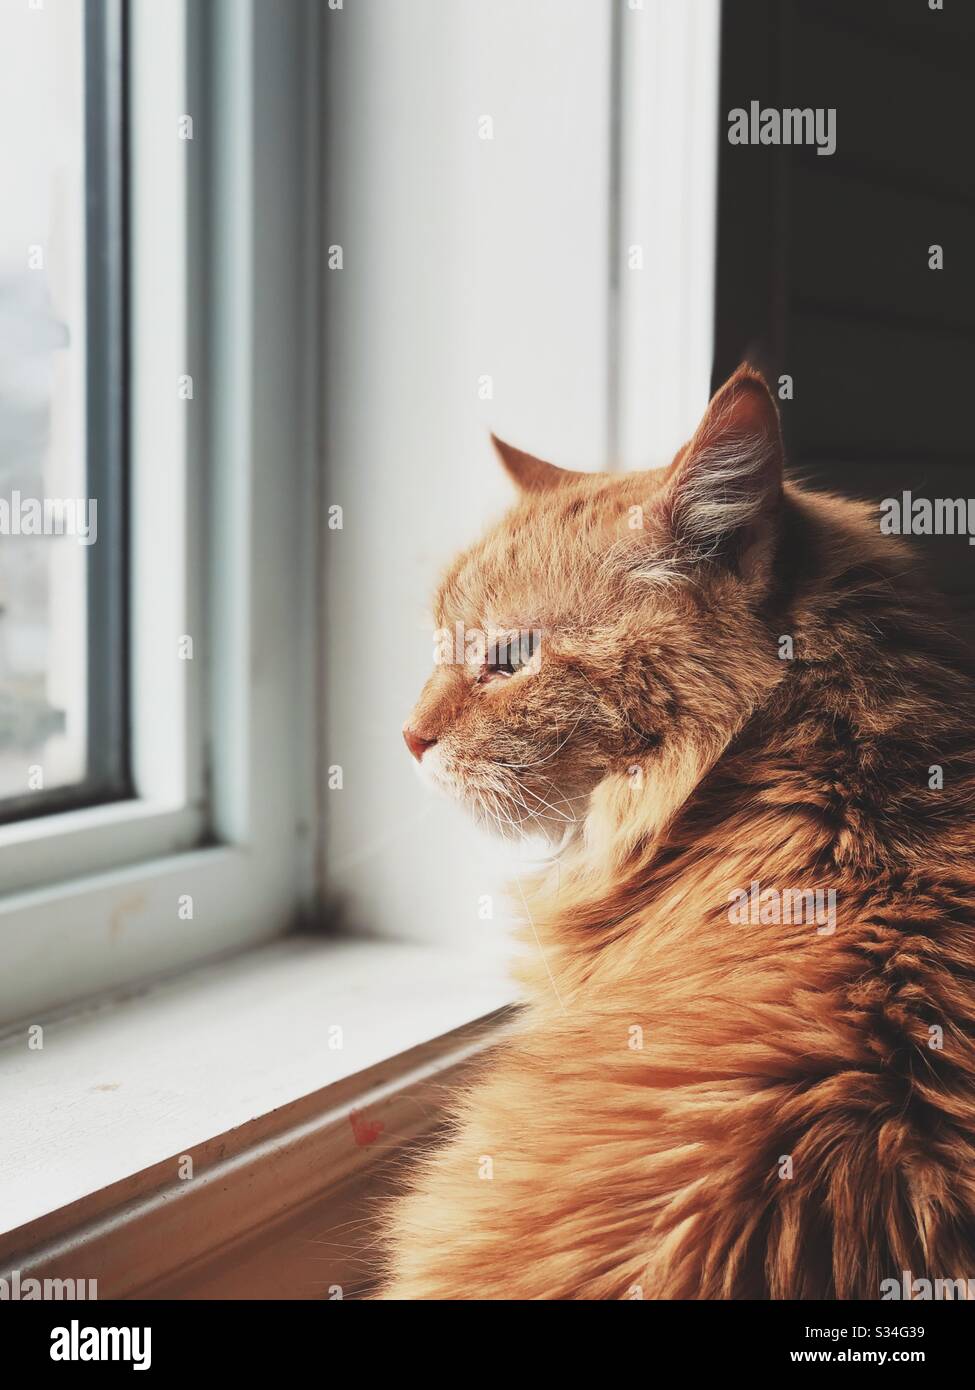 Senior cat looking out window Stock Photo